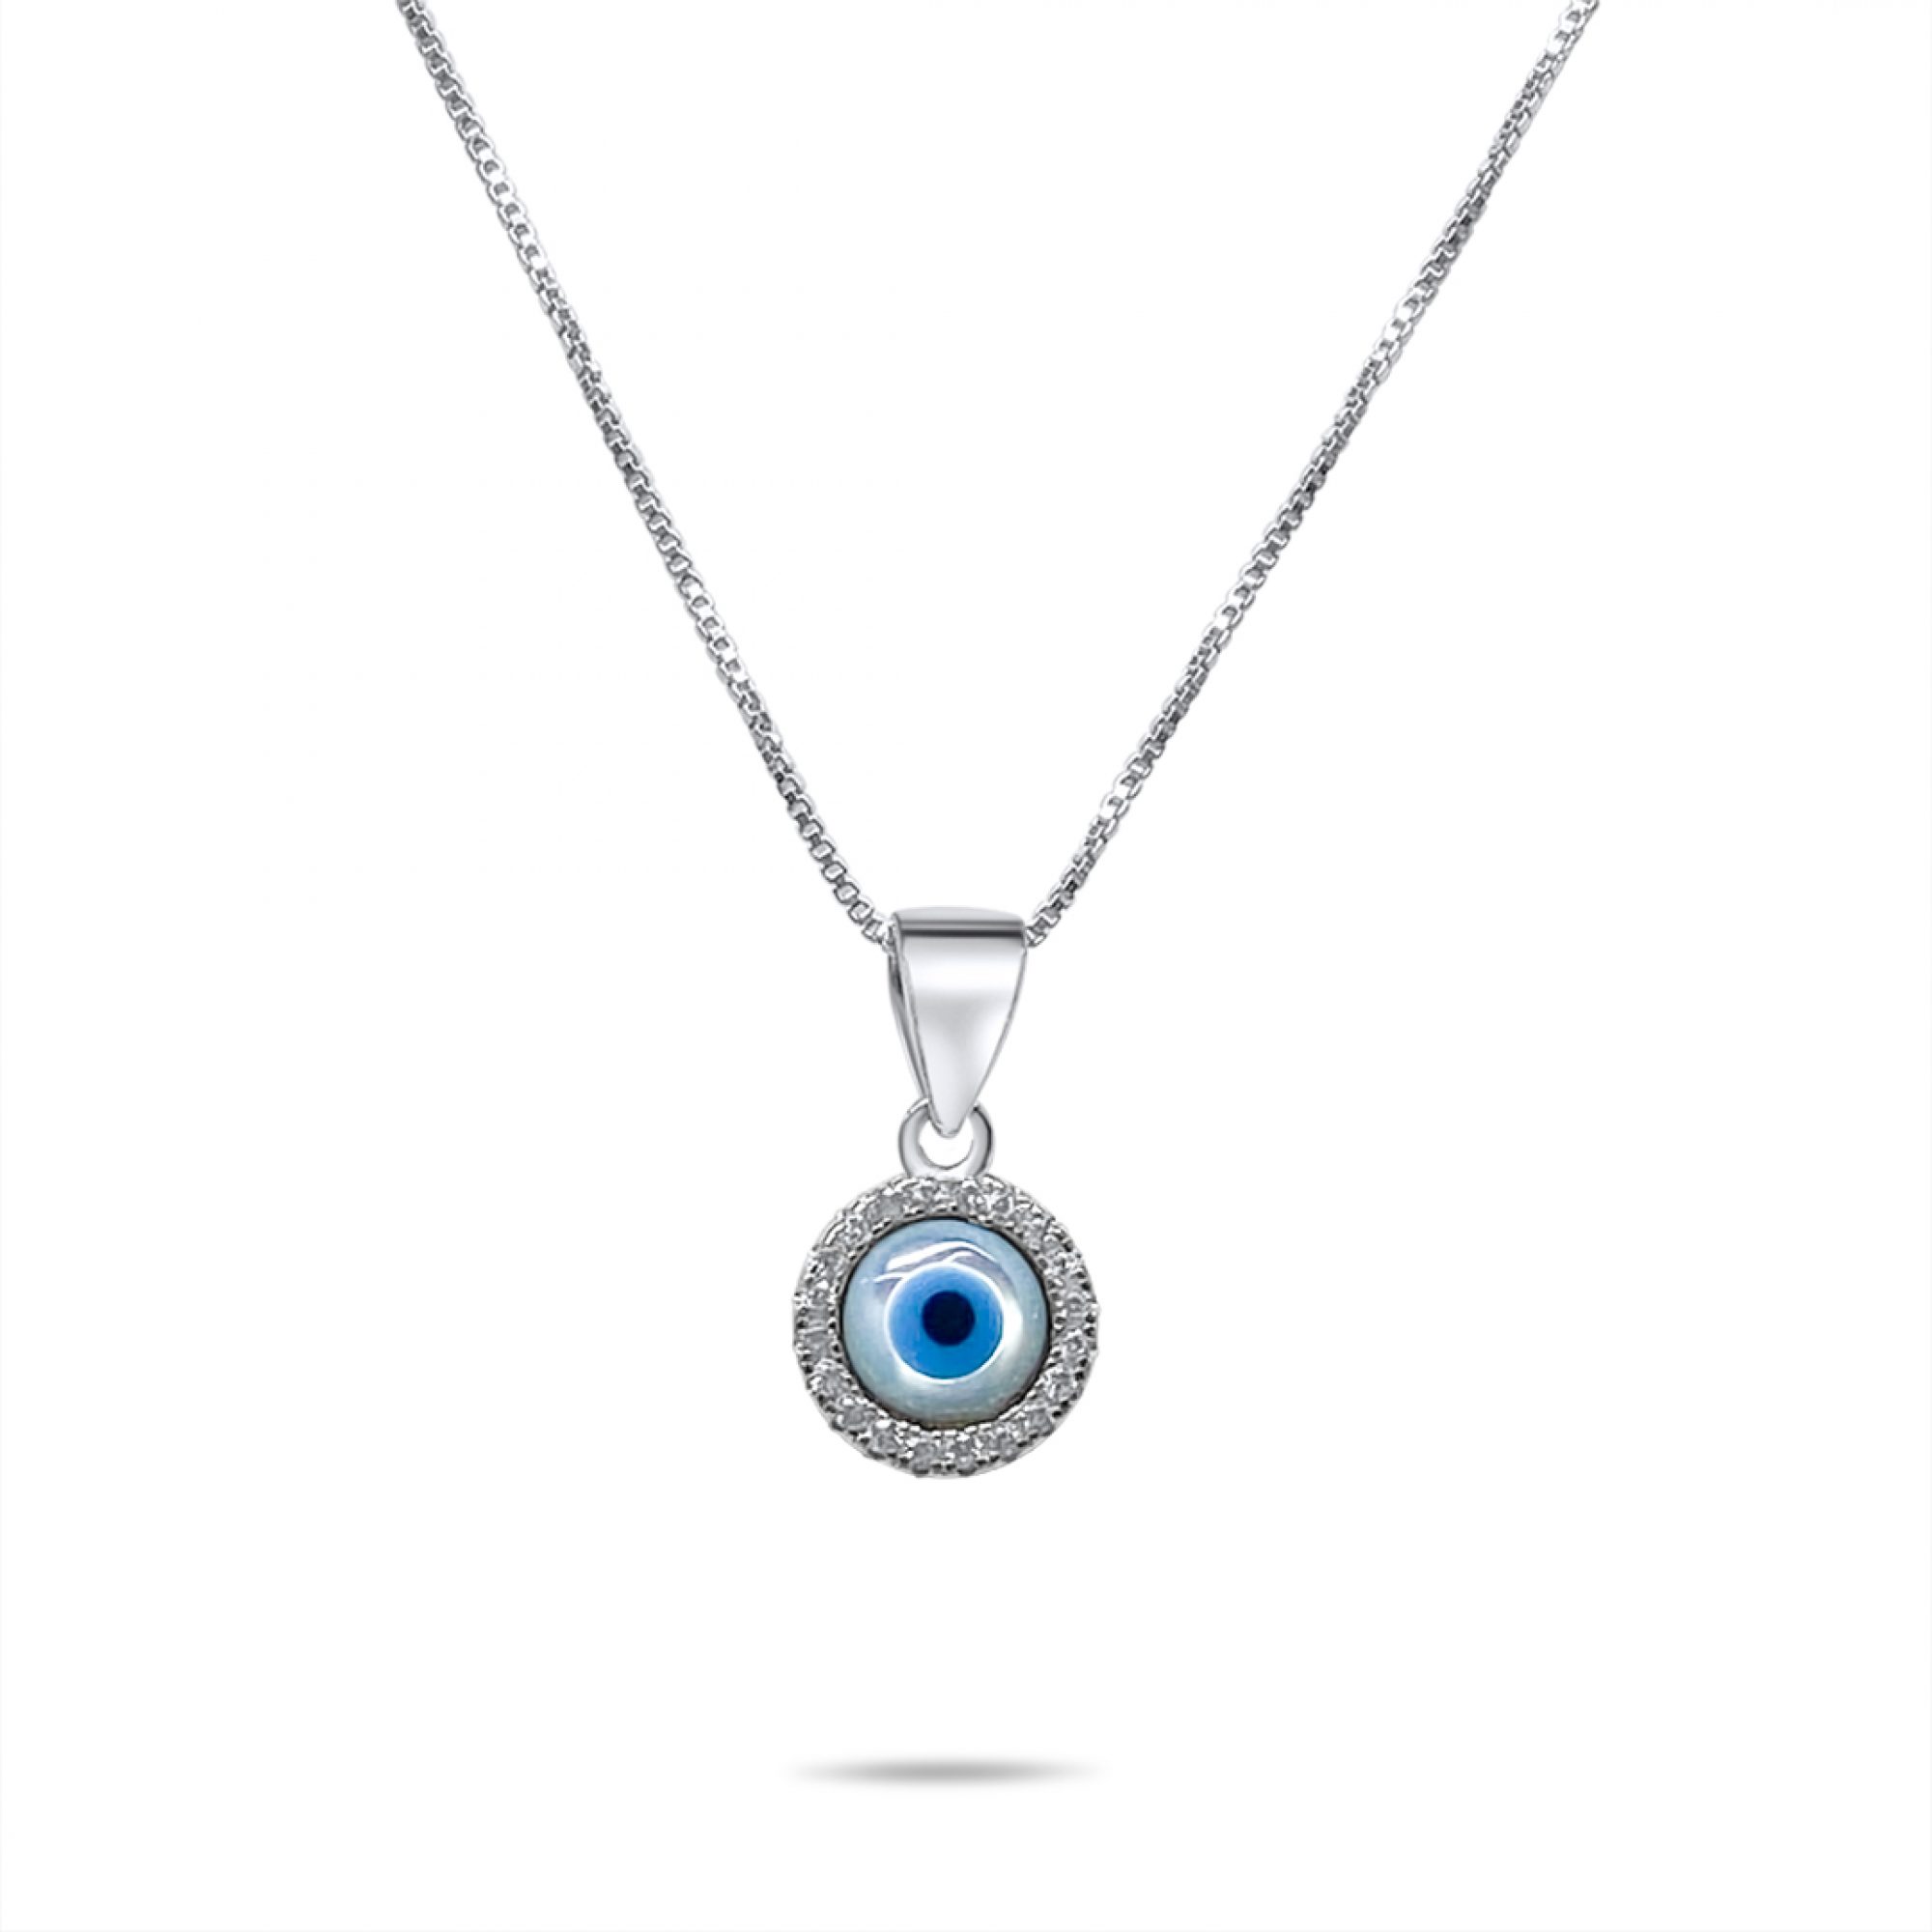 Eye pendant necklace with mother of pearl and zircon stones